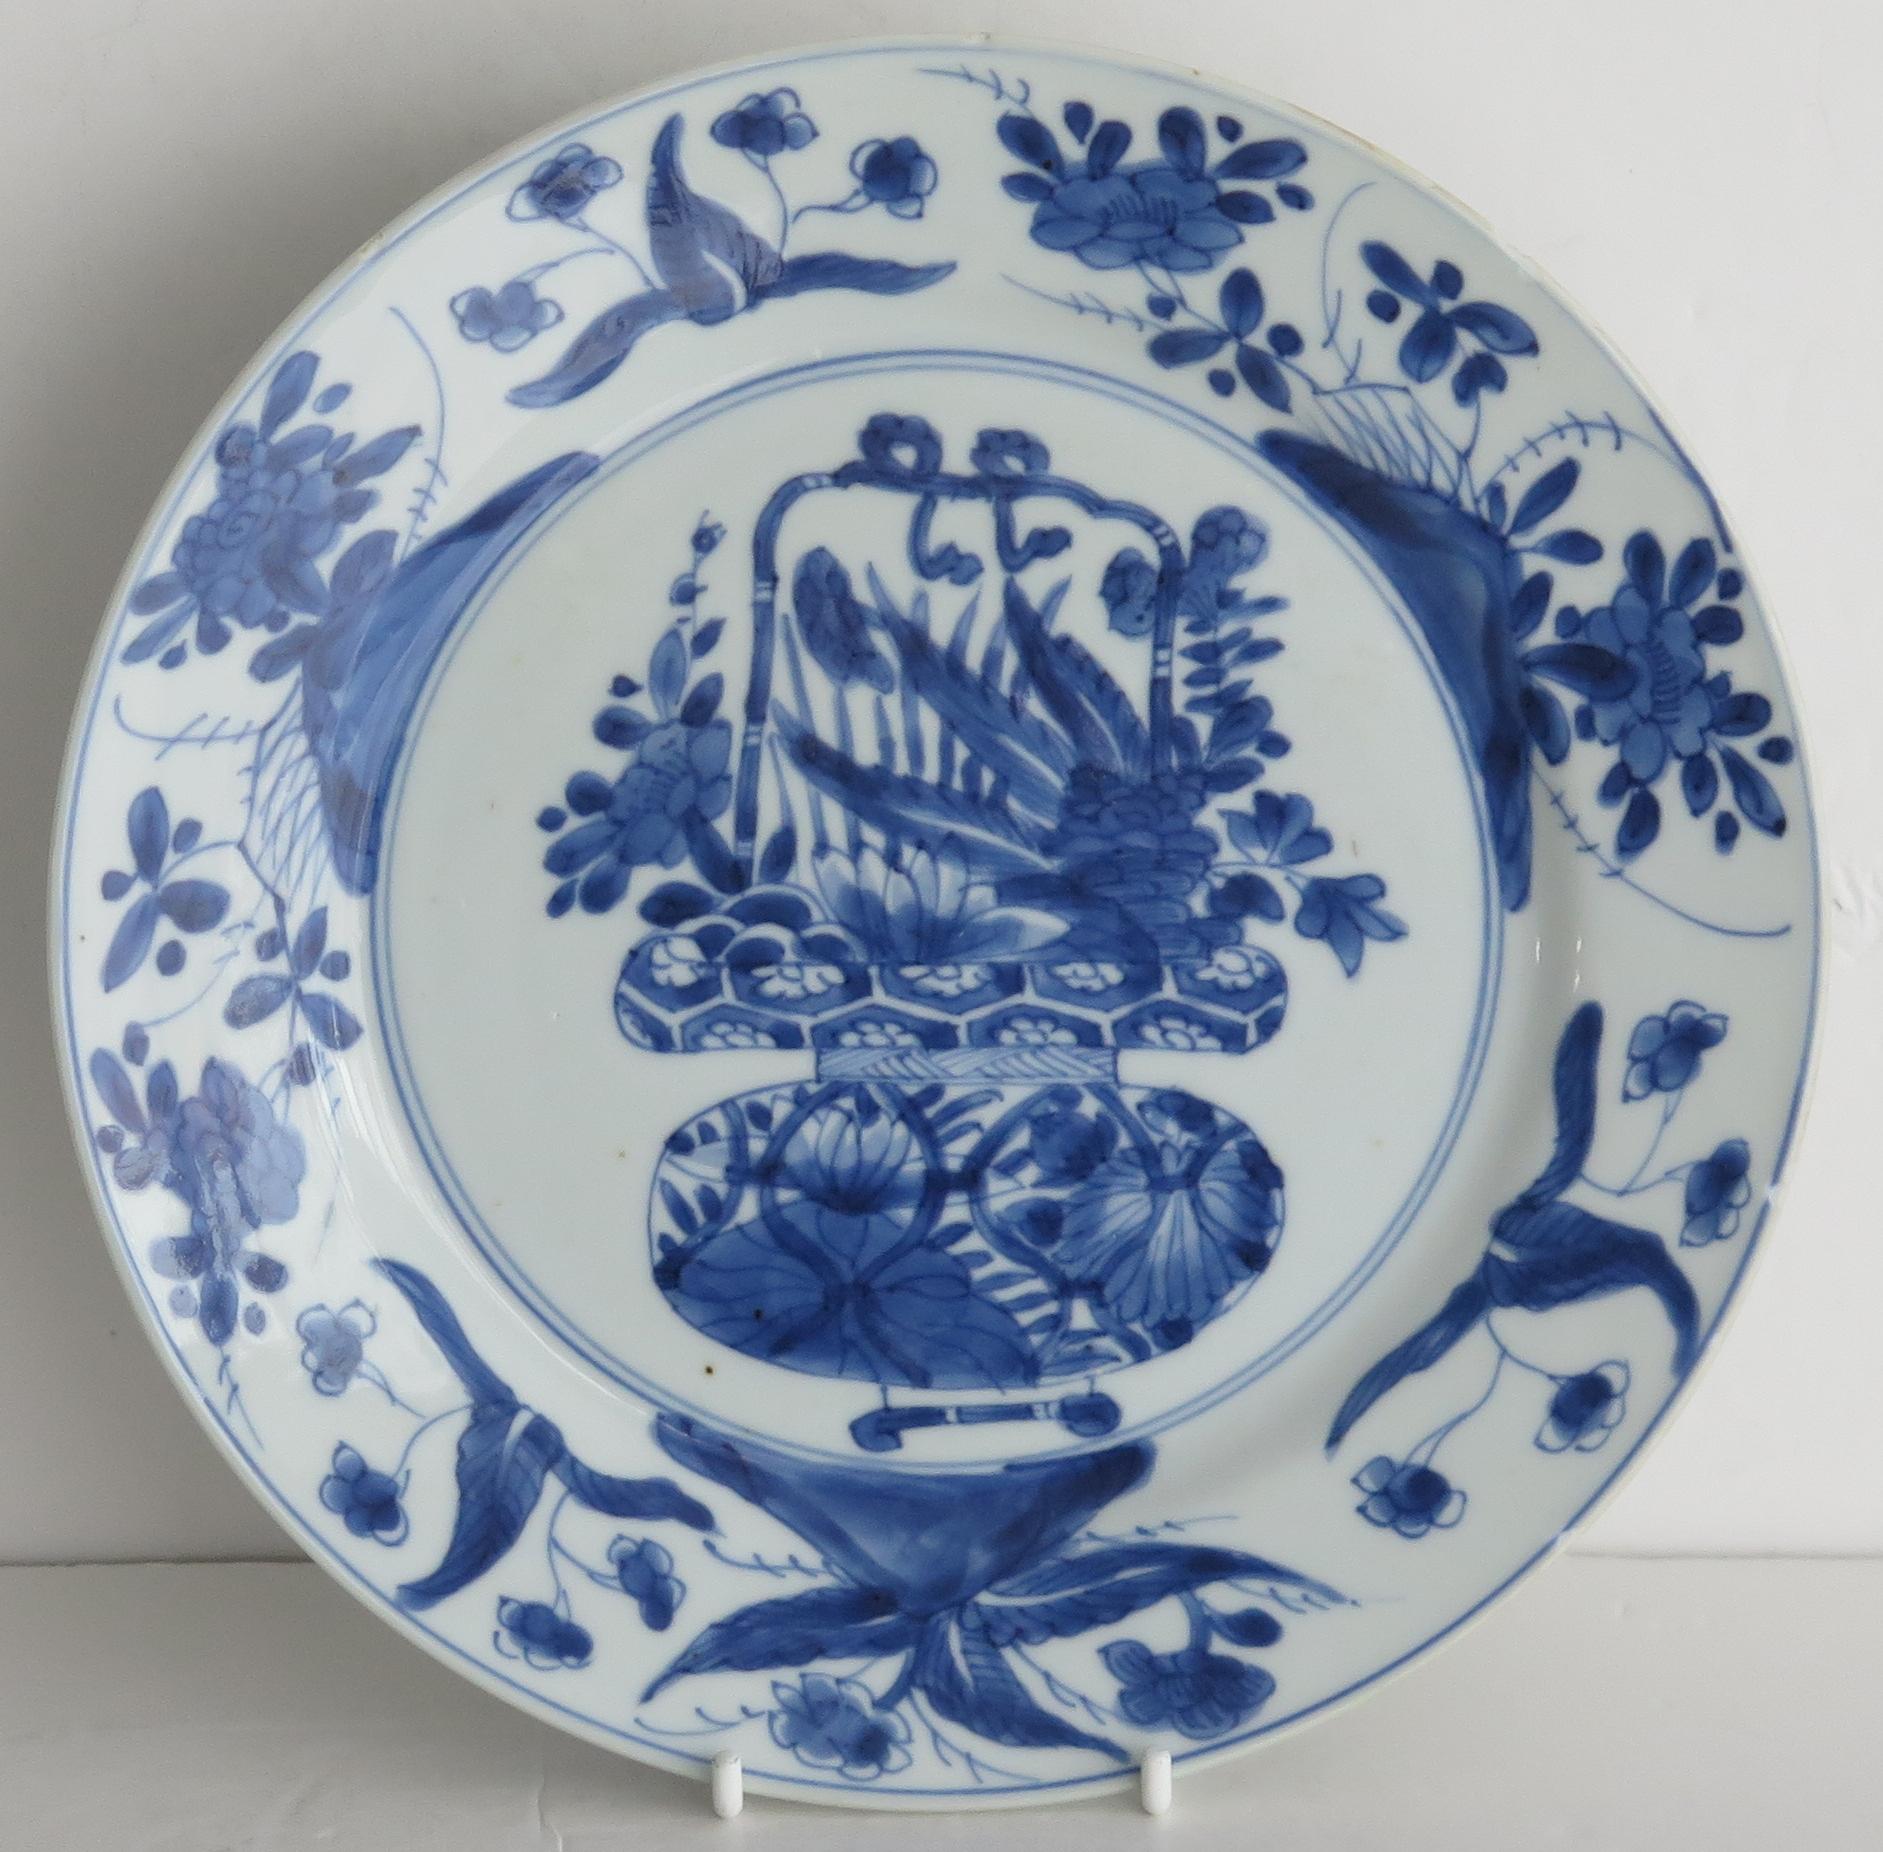 This is a beautifully hand-painted Chinese porcelain blue and white plate from the Qing, Kangxi period, 1662-1722.

The plate is finely potted with a carefully cut base rim and a lovely rich glassy, very light blue glaze.

The plate is